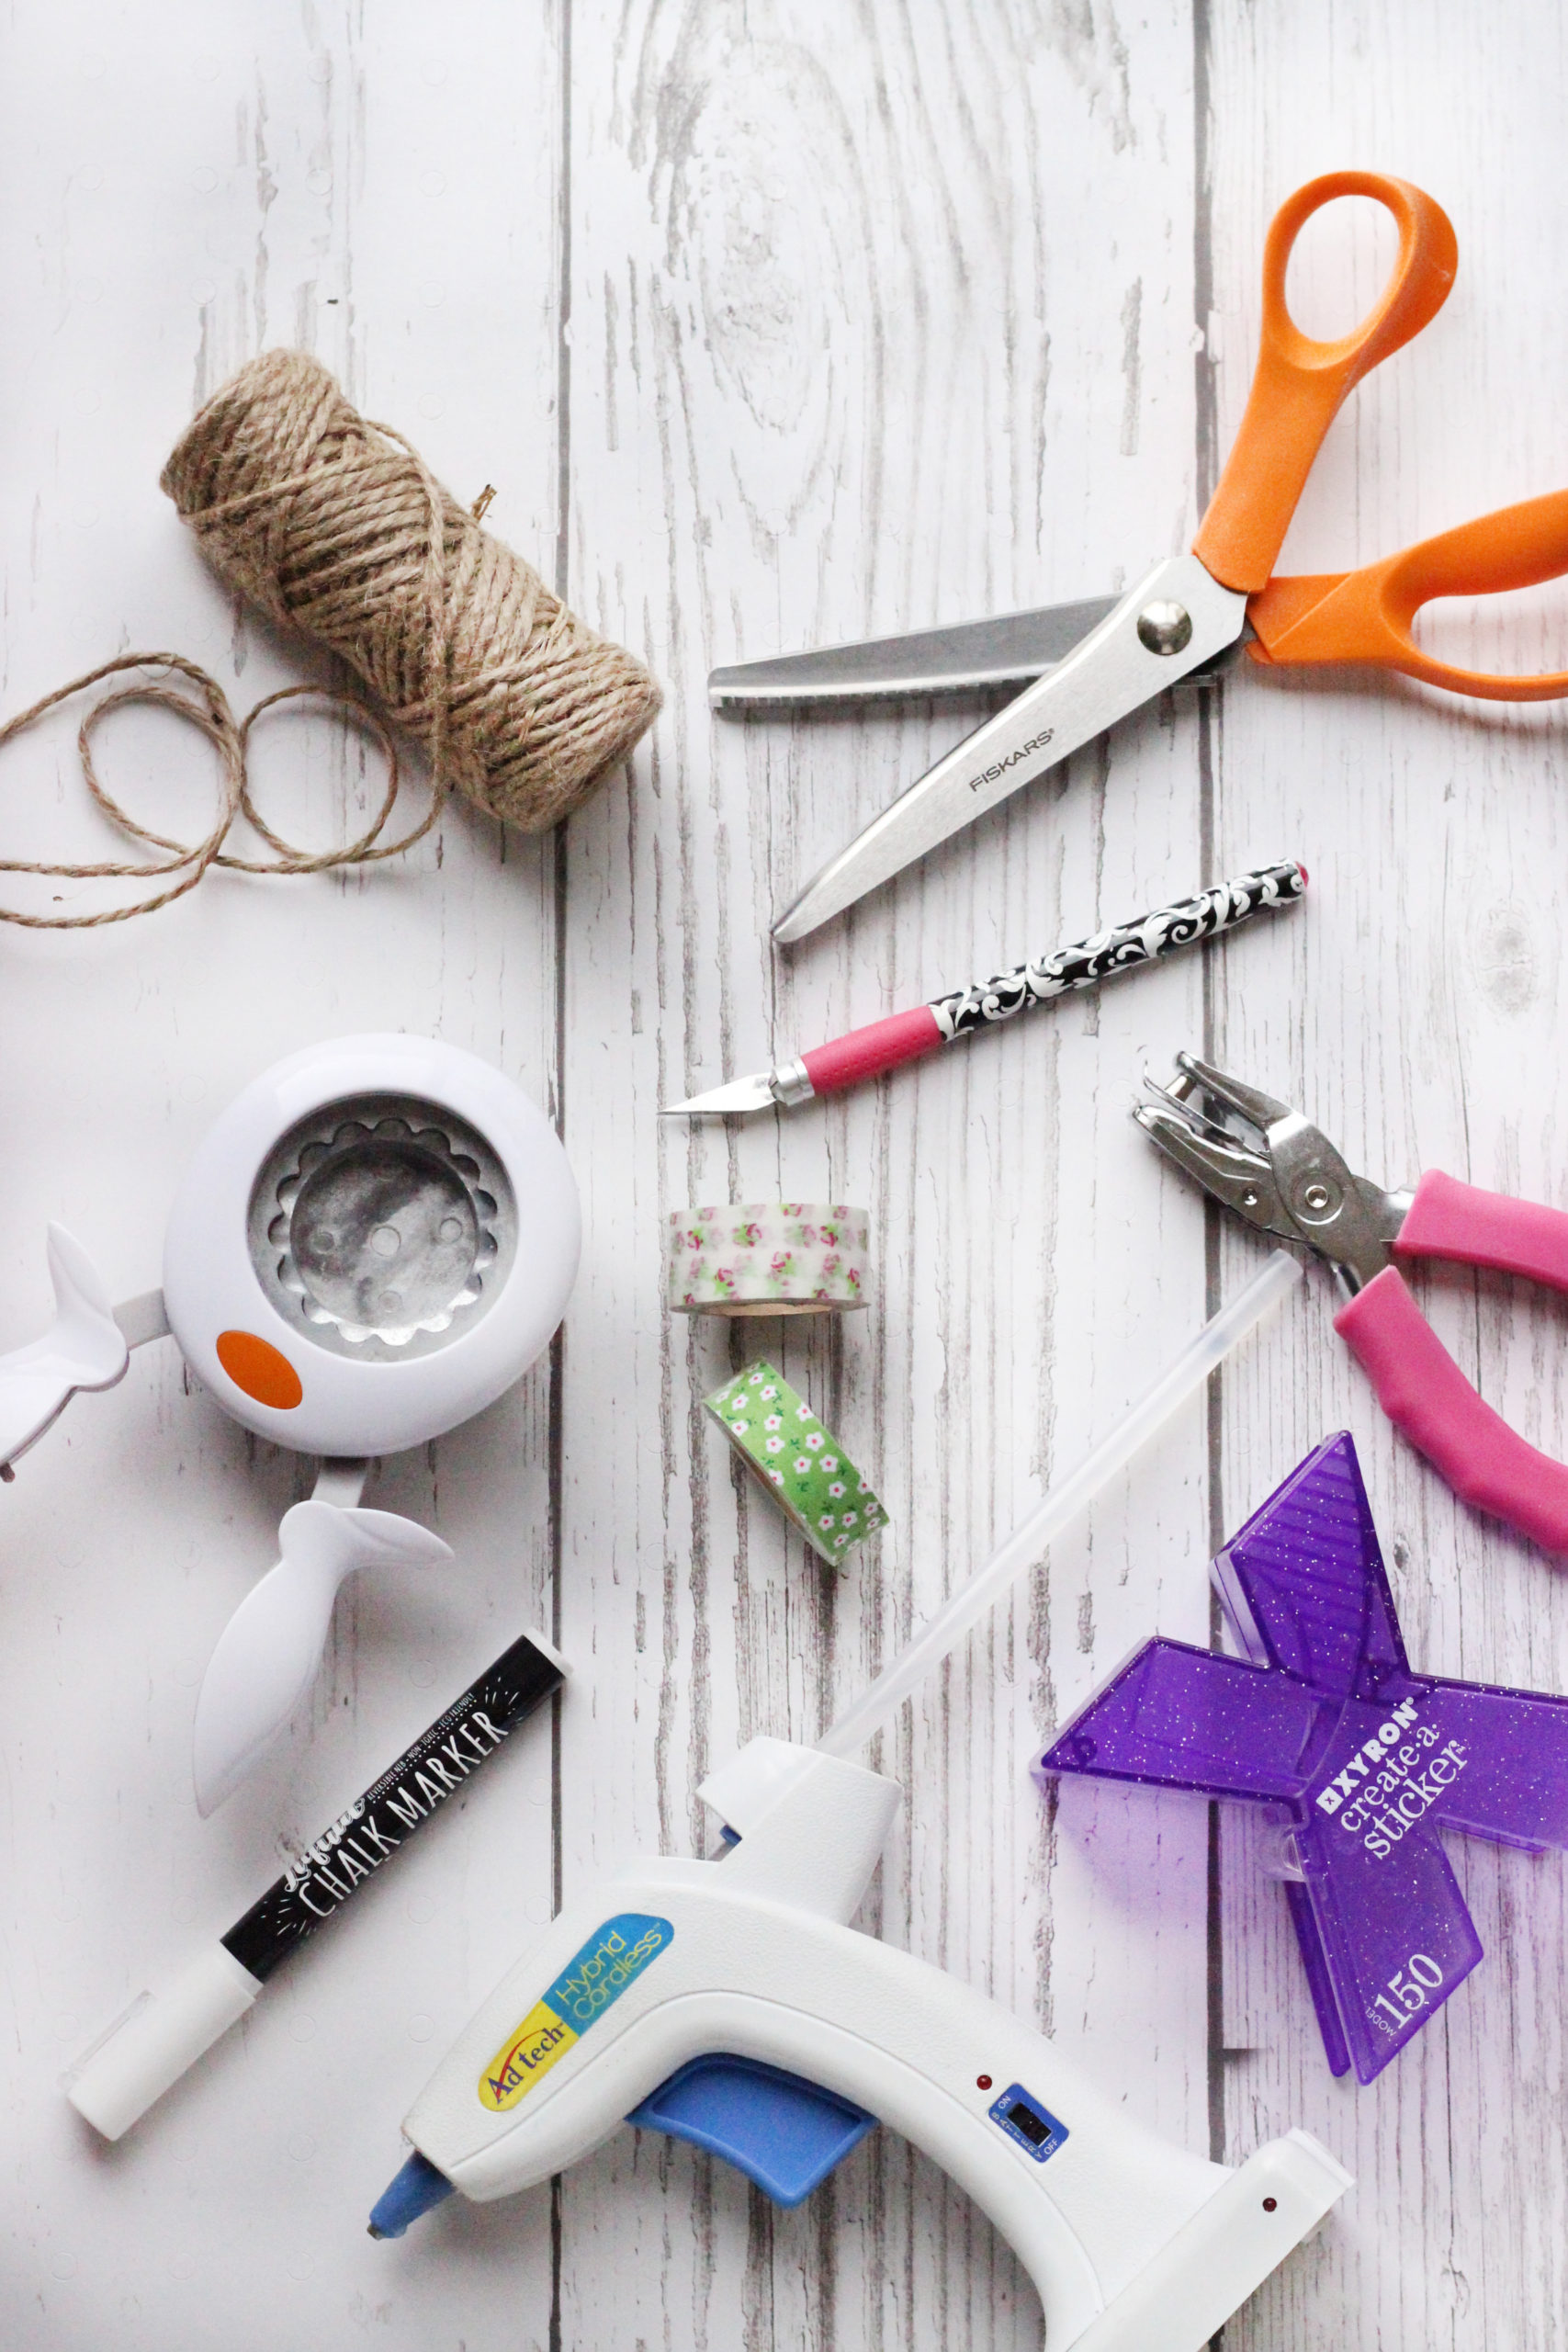 My 10 Must-Have Craft Tools and Supplies